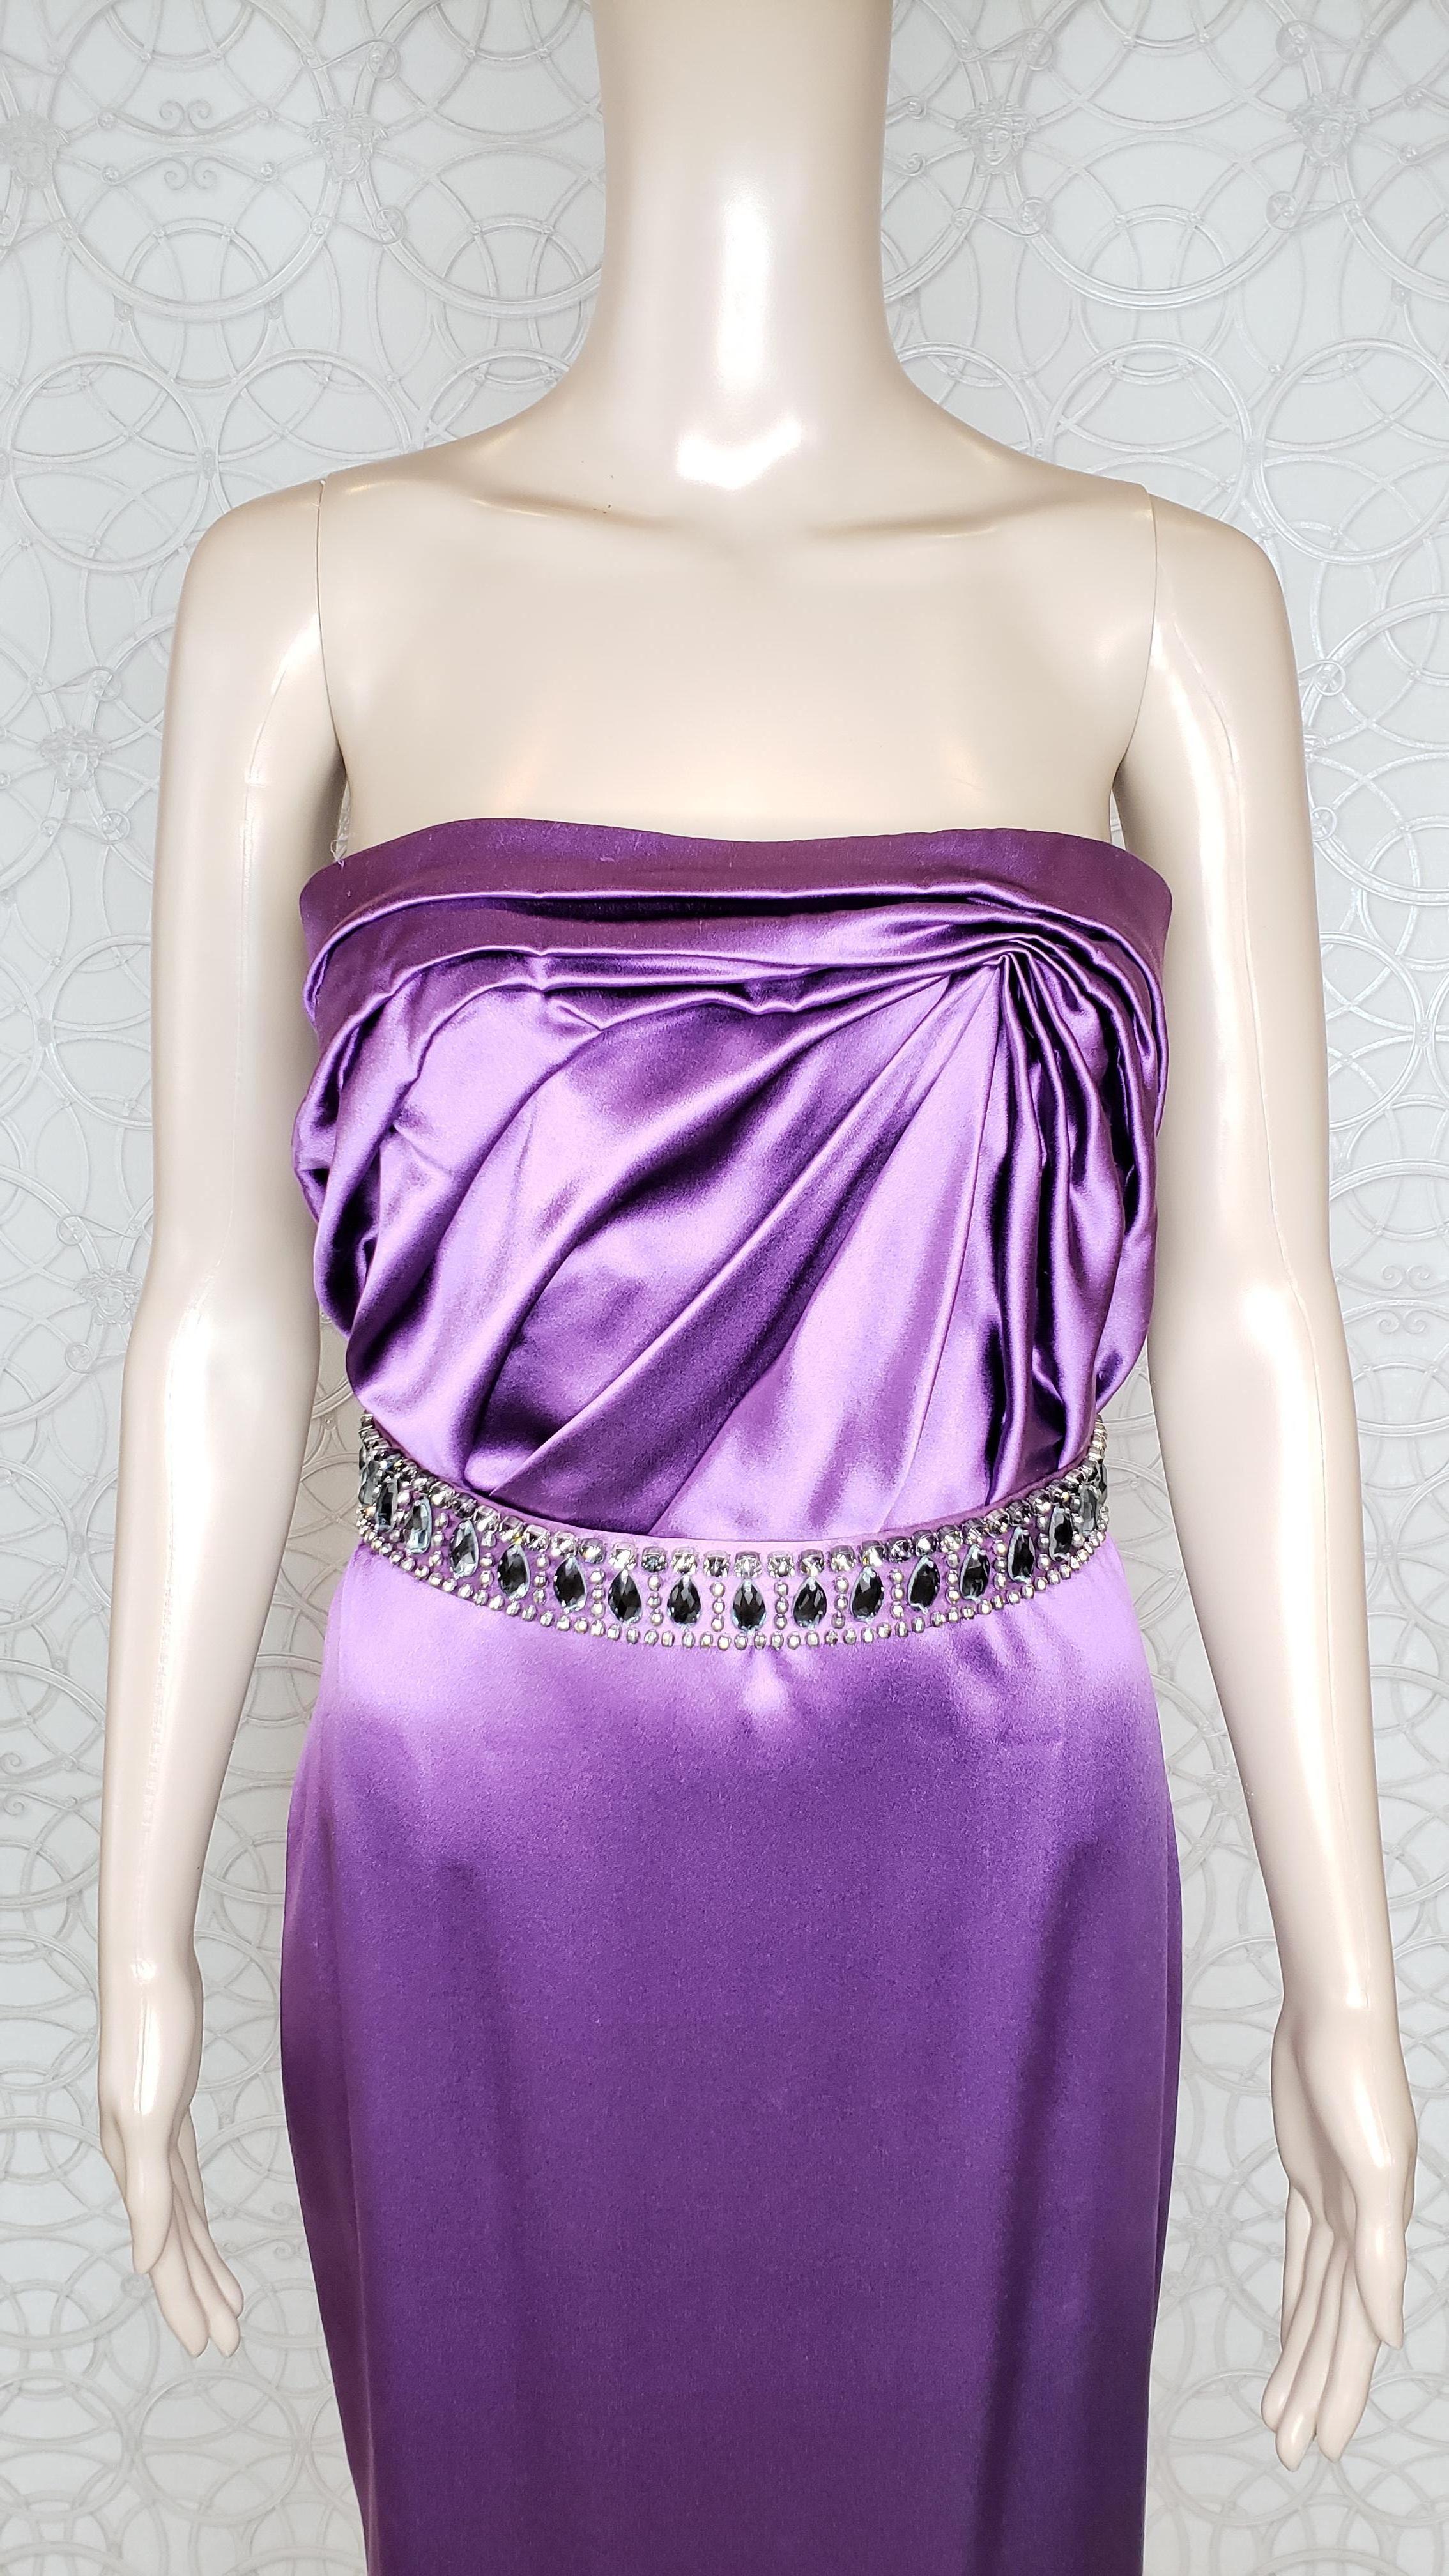 NEW VERSACE EMBELLISHED AMETHYST STRAPLESS GOWN DRESS EVA WORE IN Paris! 38 - 2 For Sale 4